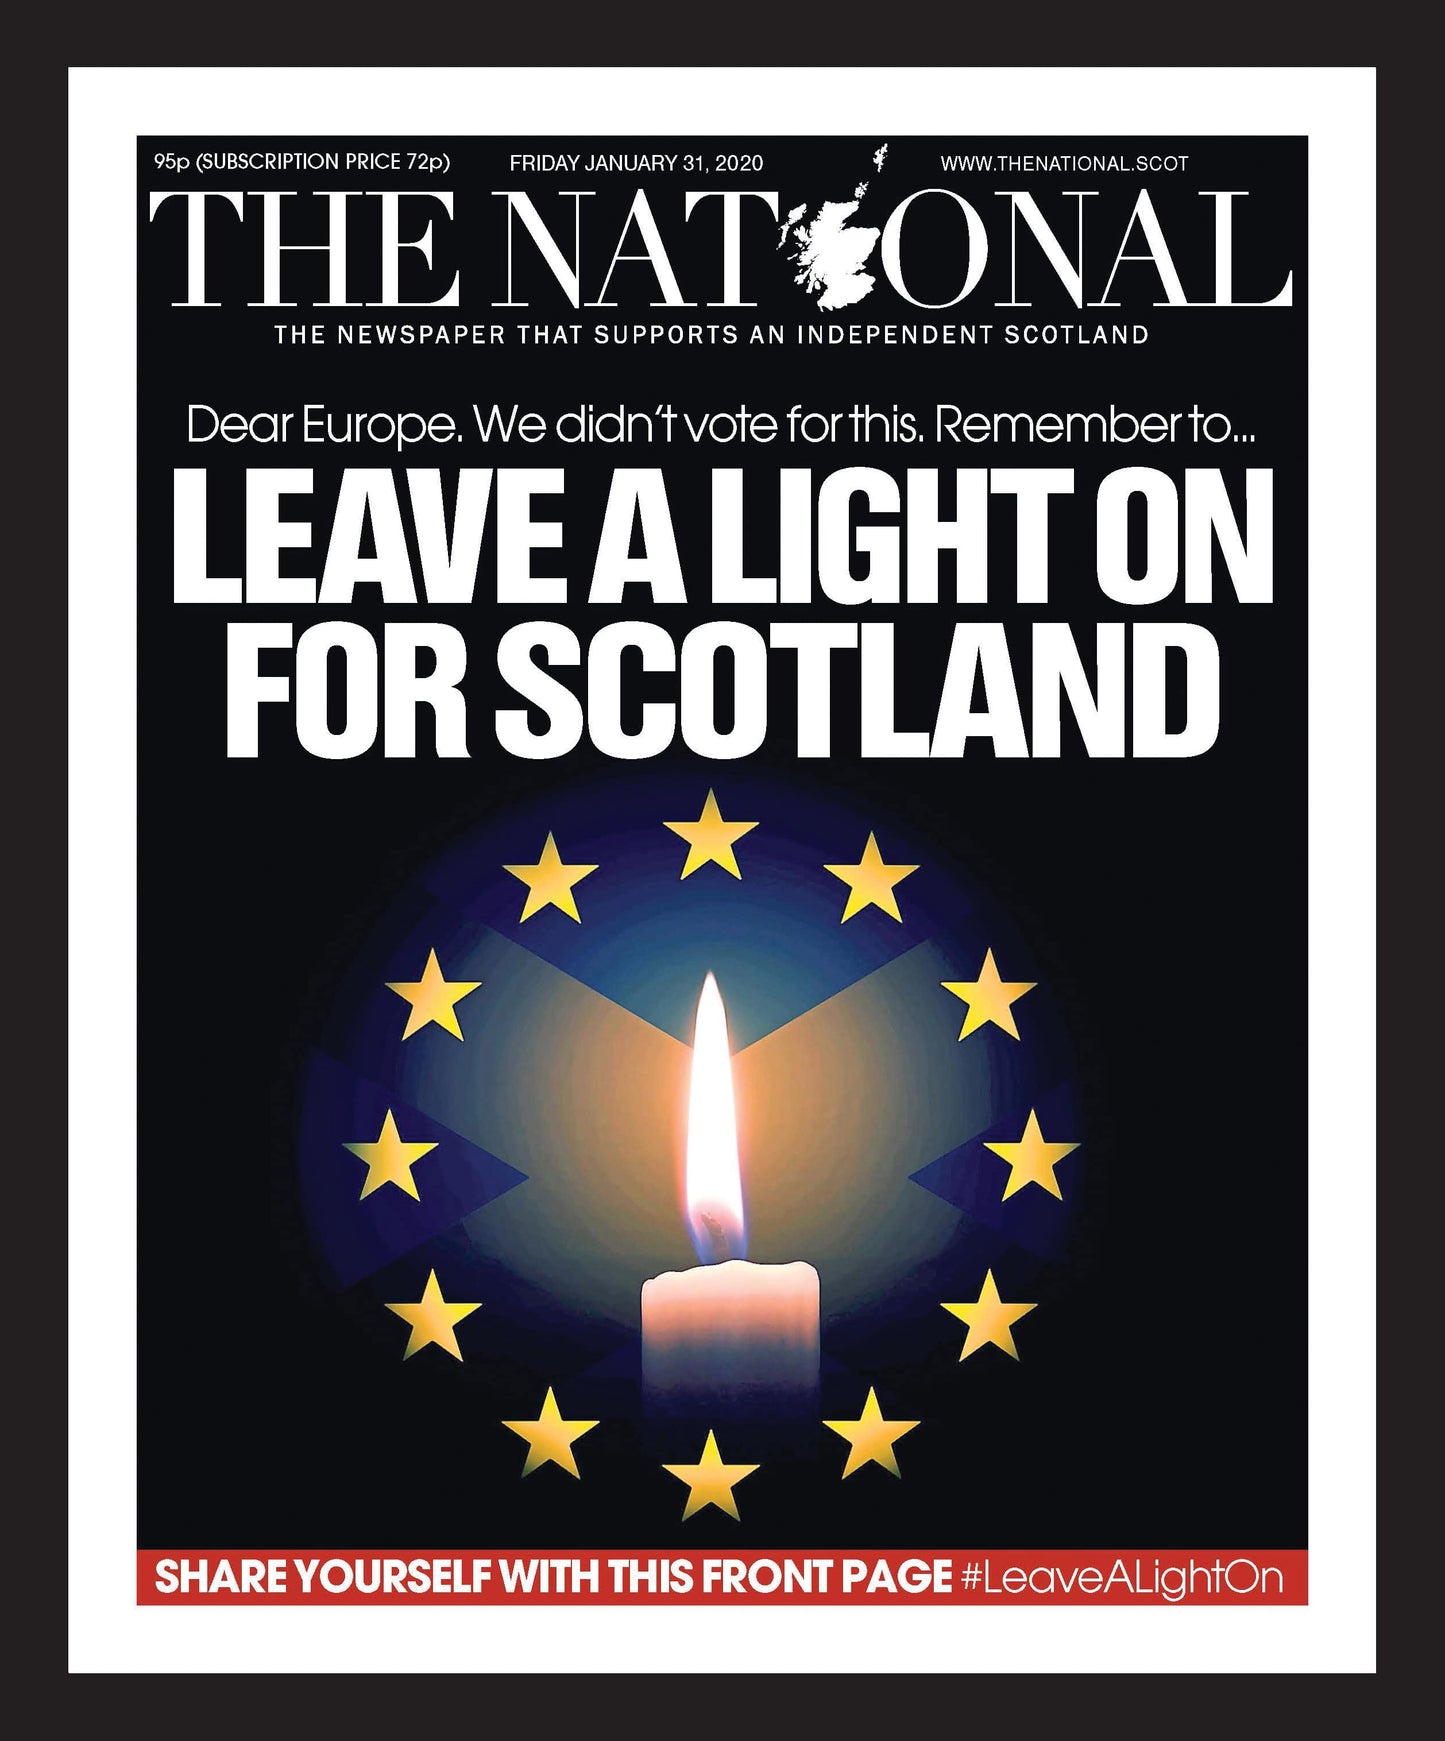 The National Front Cover - LEAVE-A-LIGHT-ON